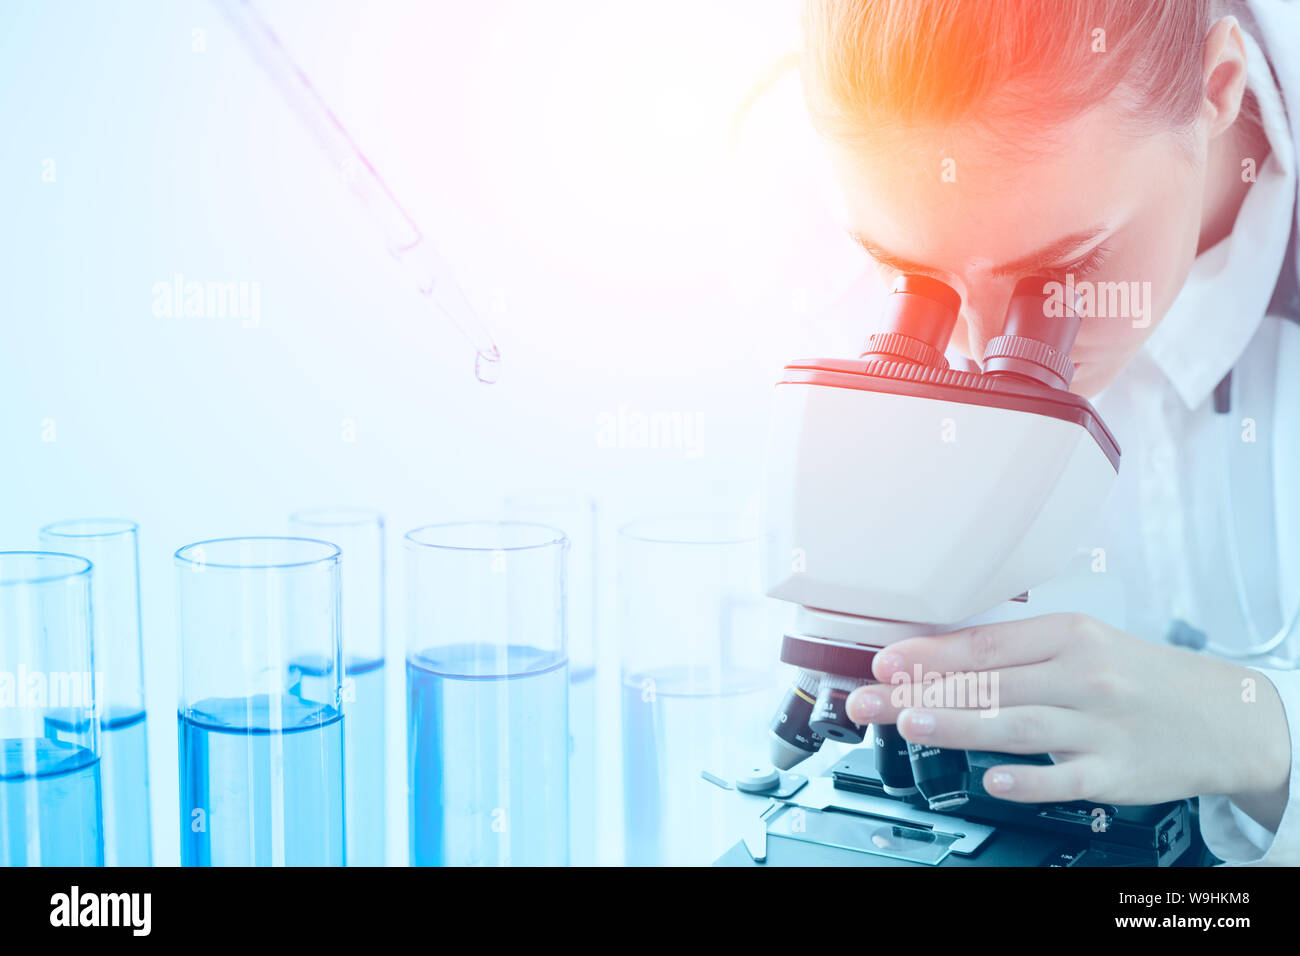 Science research lap chemical test drop with scientist usign microscope overaly Stock Photo